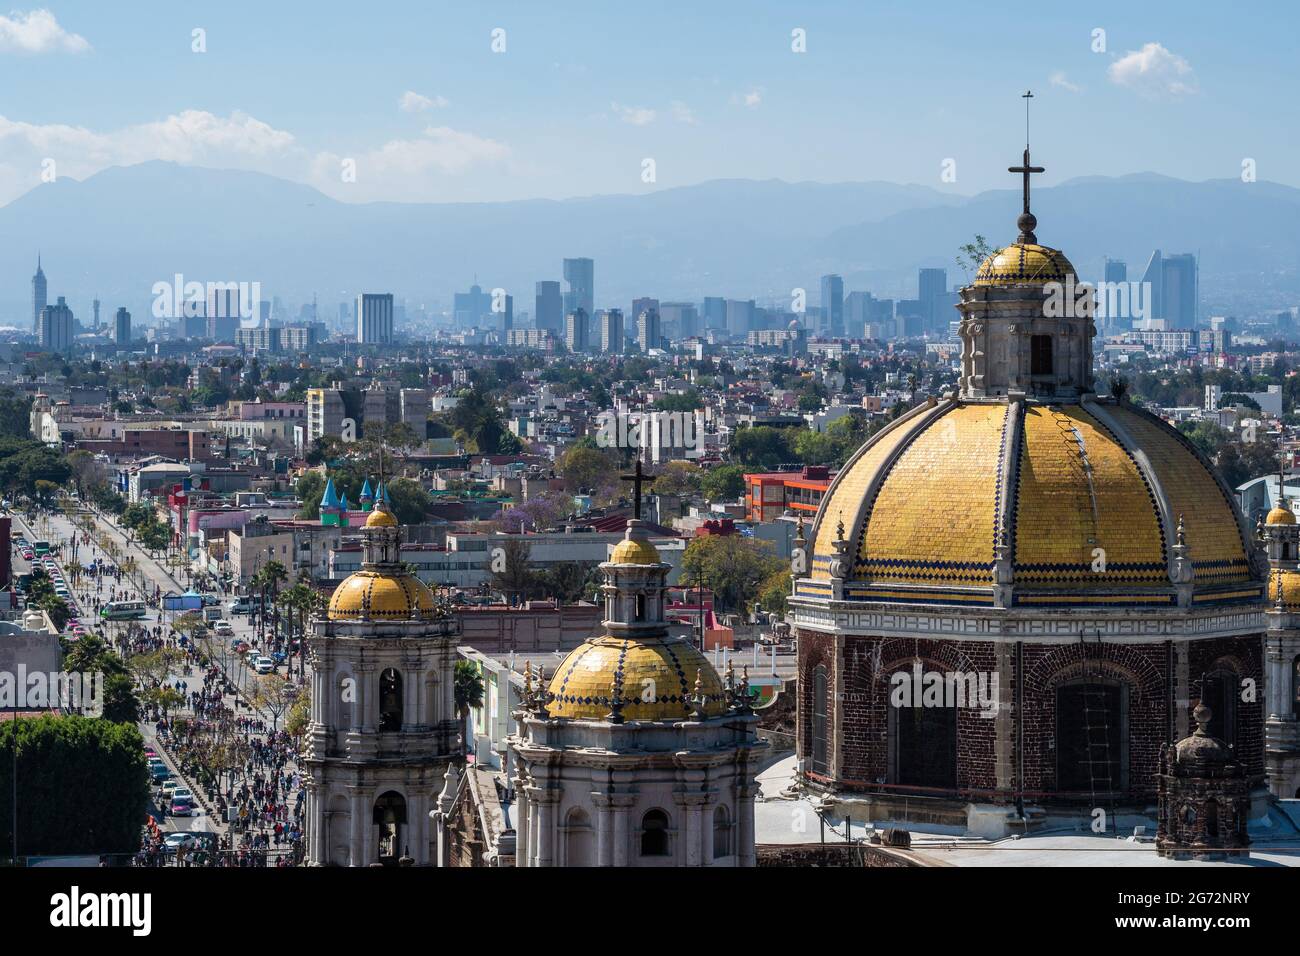 Mexico City, Mexico - January 28, 2019: Historical landmark Basilica of Our Lady of Guadalupe and Mexico City skyline on a sunny day. Stock Photo